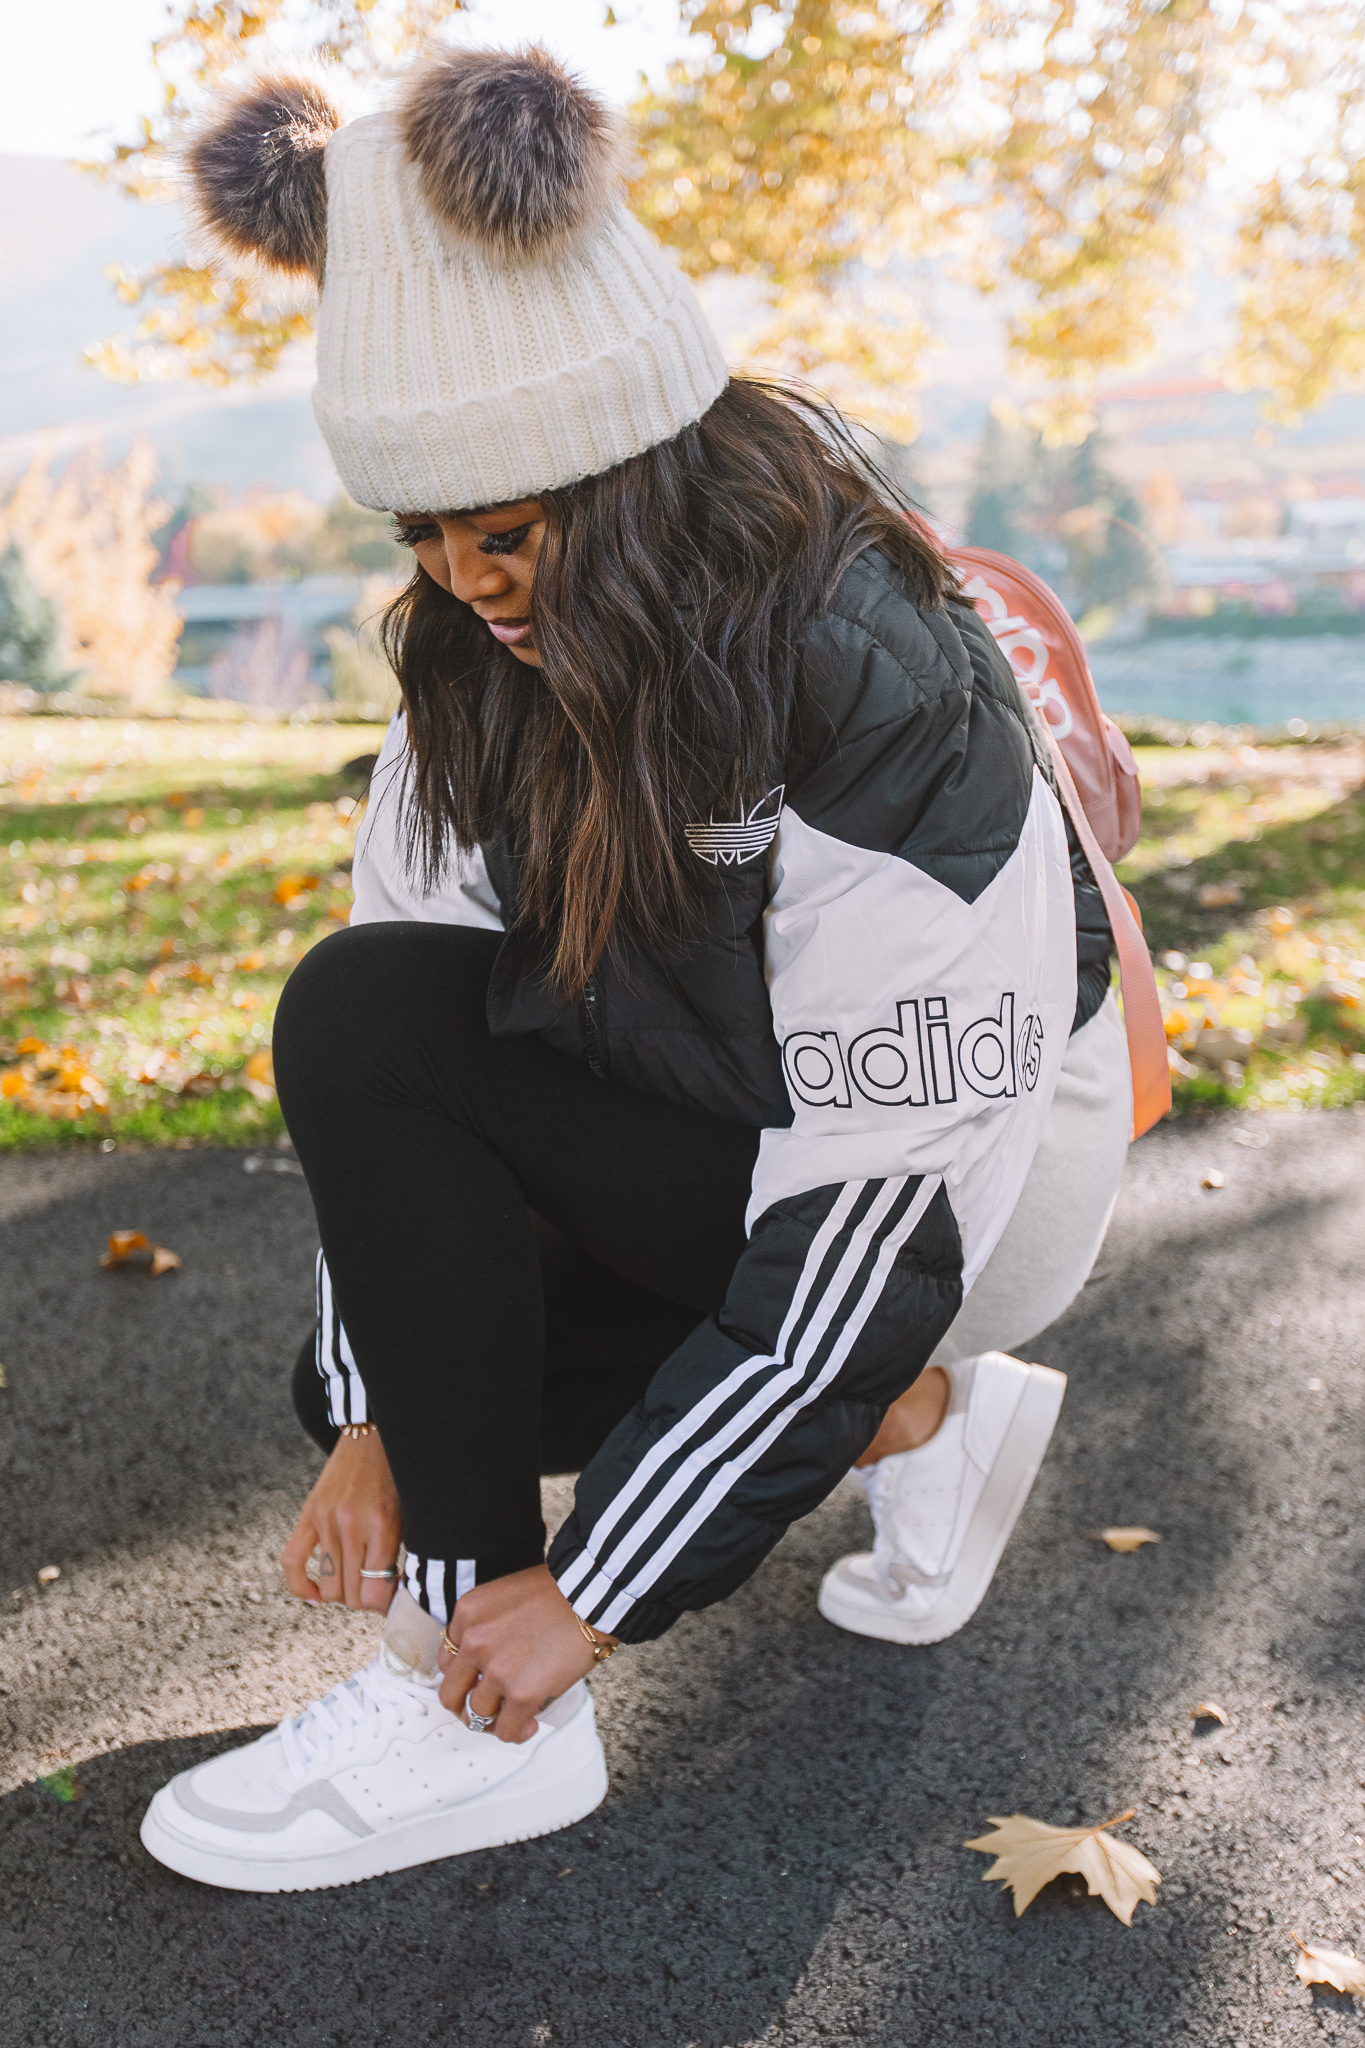 Adidas Home of Classics - White Sneakers - Gypsy Tan - 6